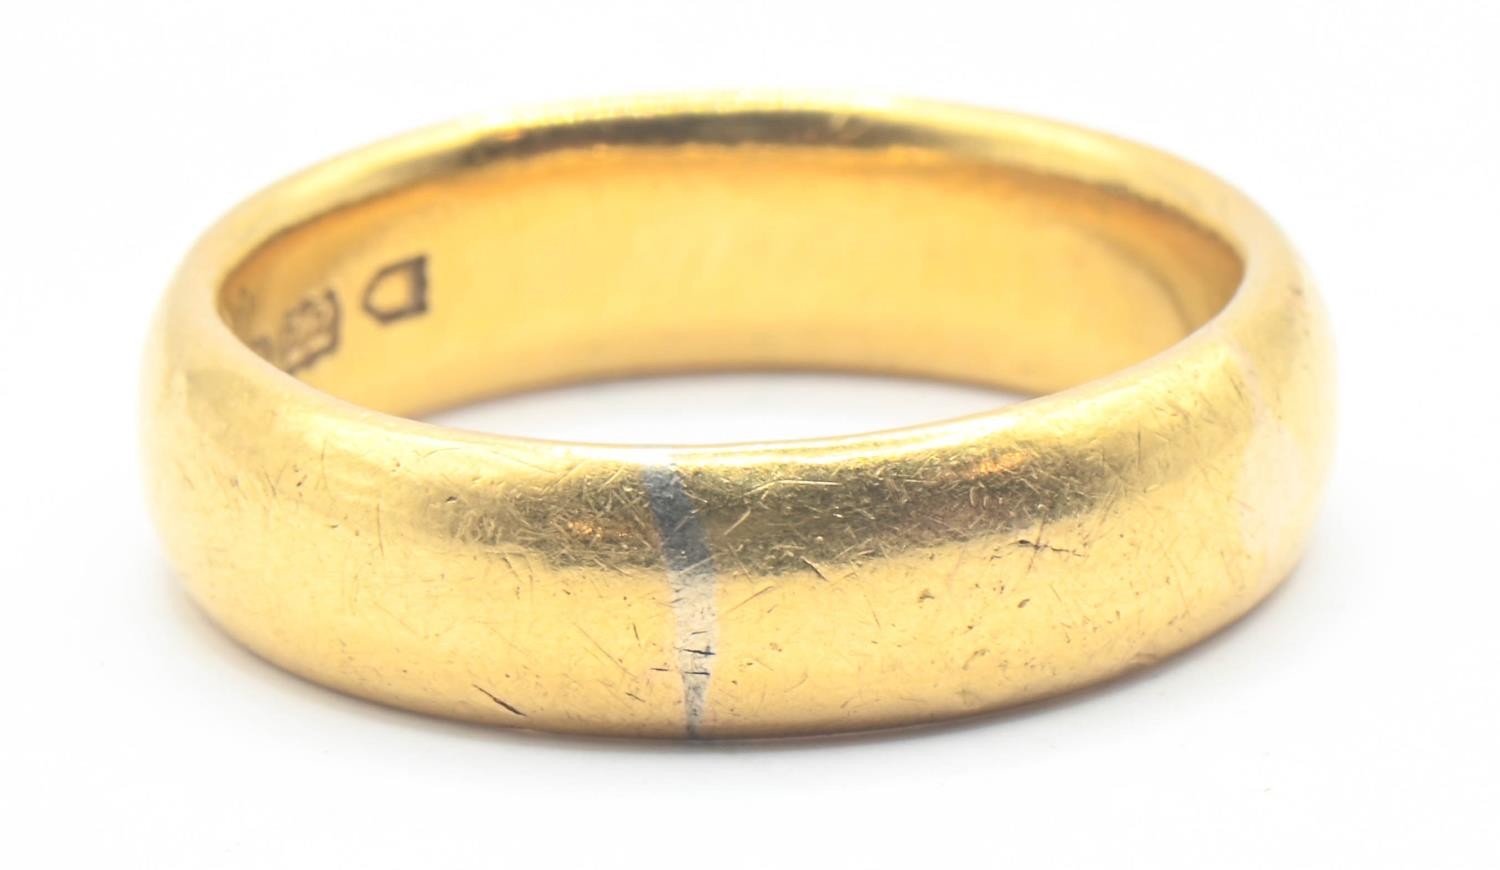 22ct gold band ring, size Q 1/2, 10 grams  - Image 3 of 3